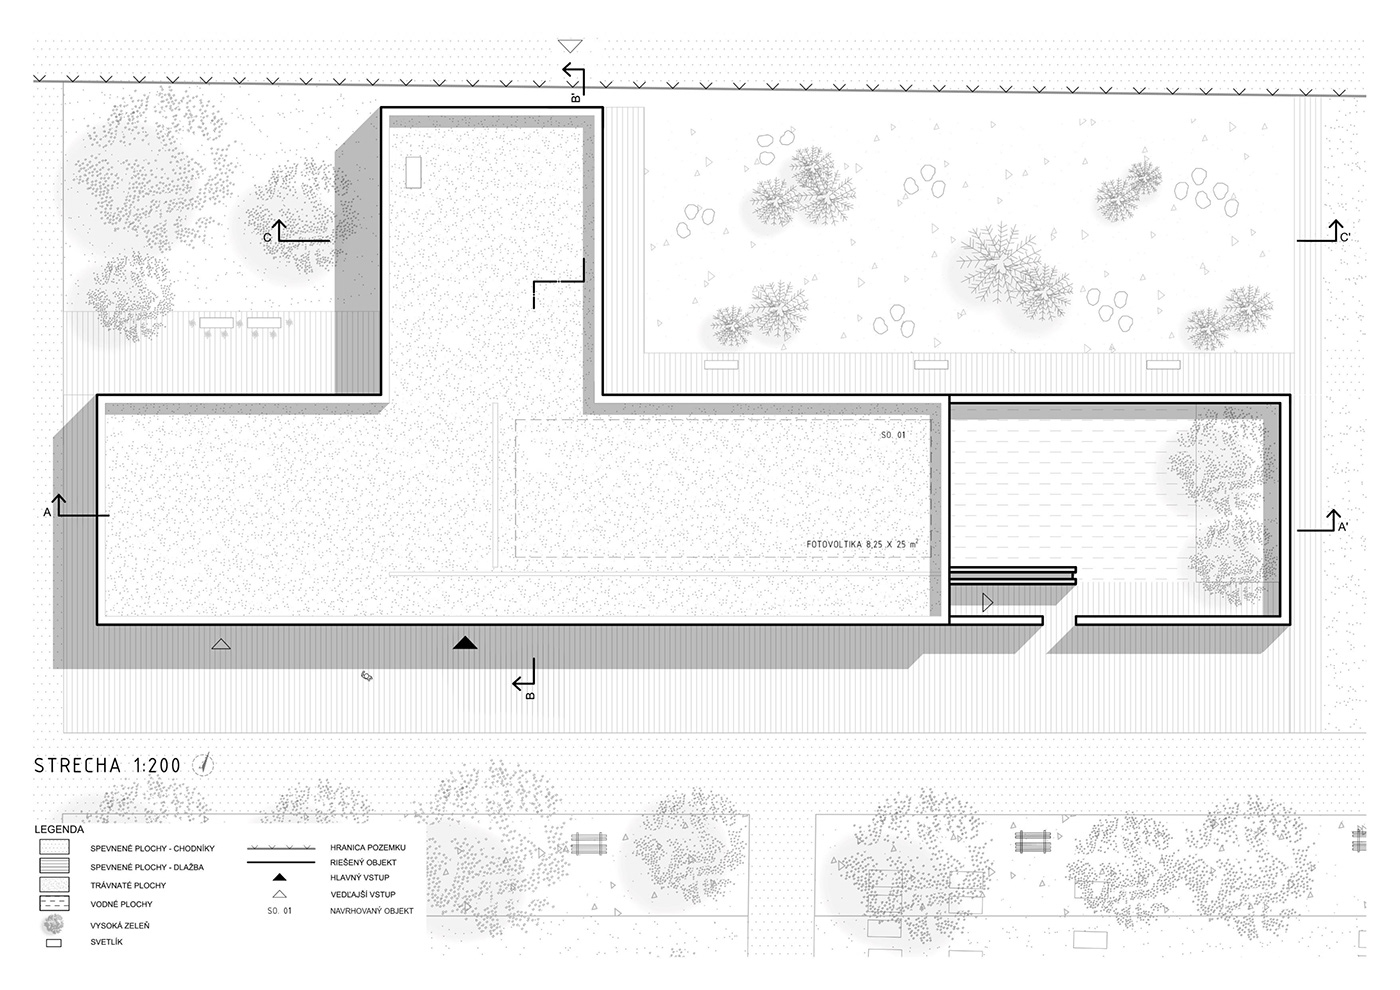 cemetery bachelor thesis Architecture Student light crematorium funeral Funeral hall Light and Architecture slit